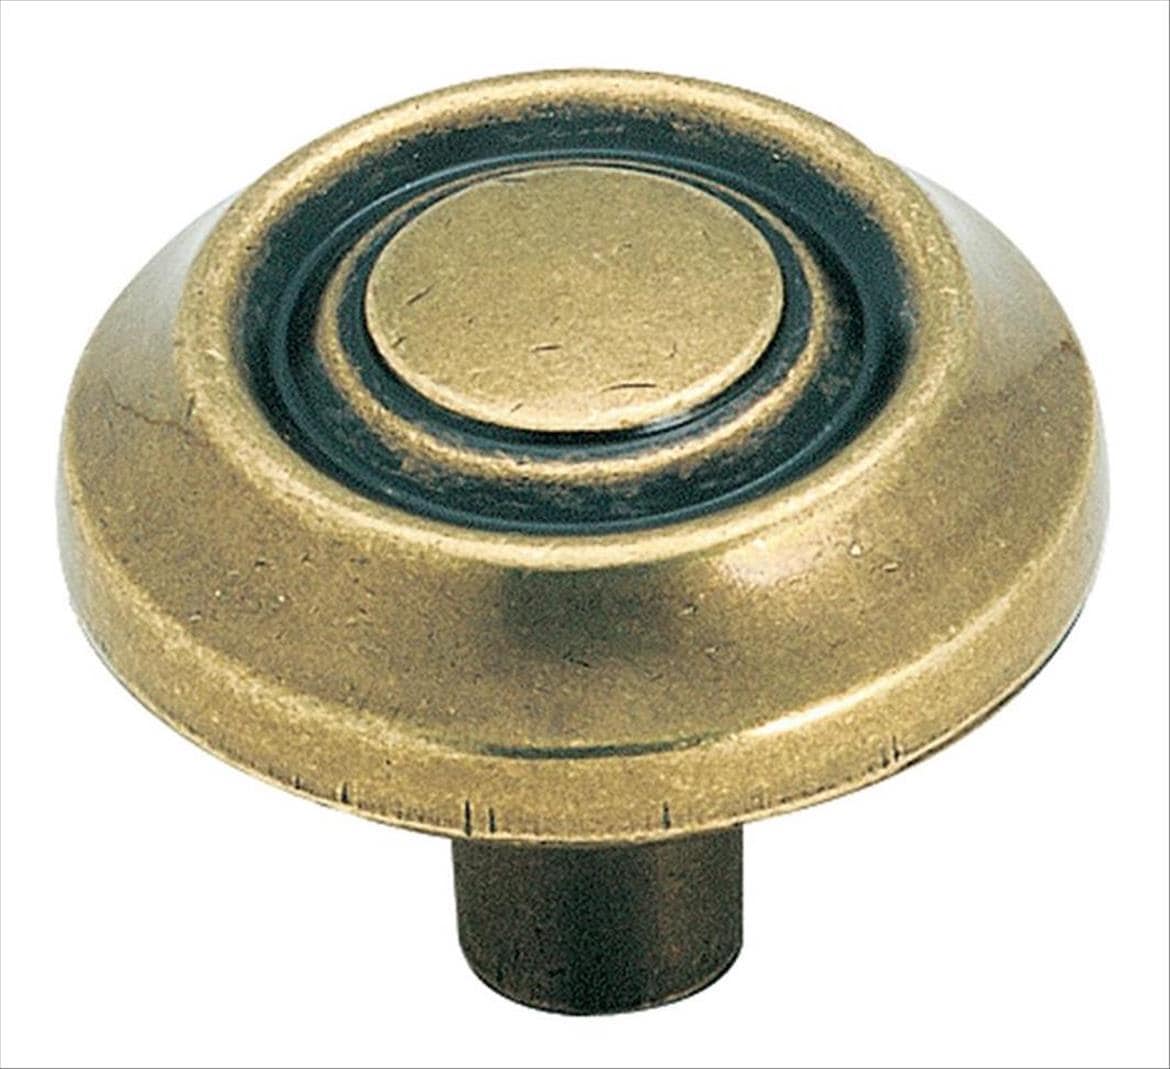 Amerock Traditional Classic 1-3/16 in. Burnished Brass Round